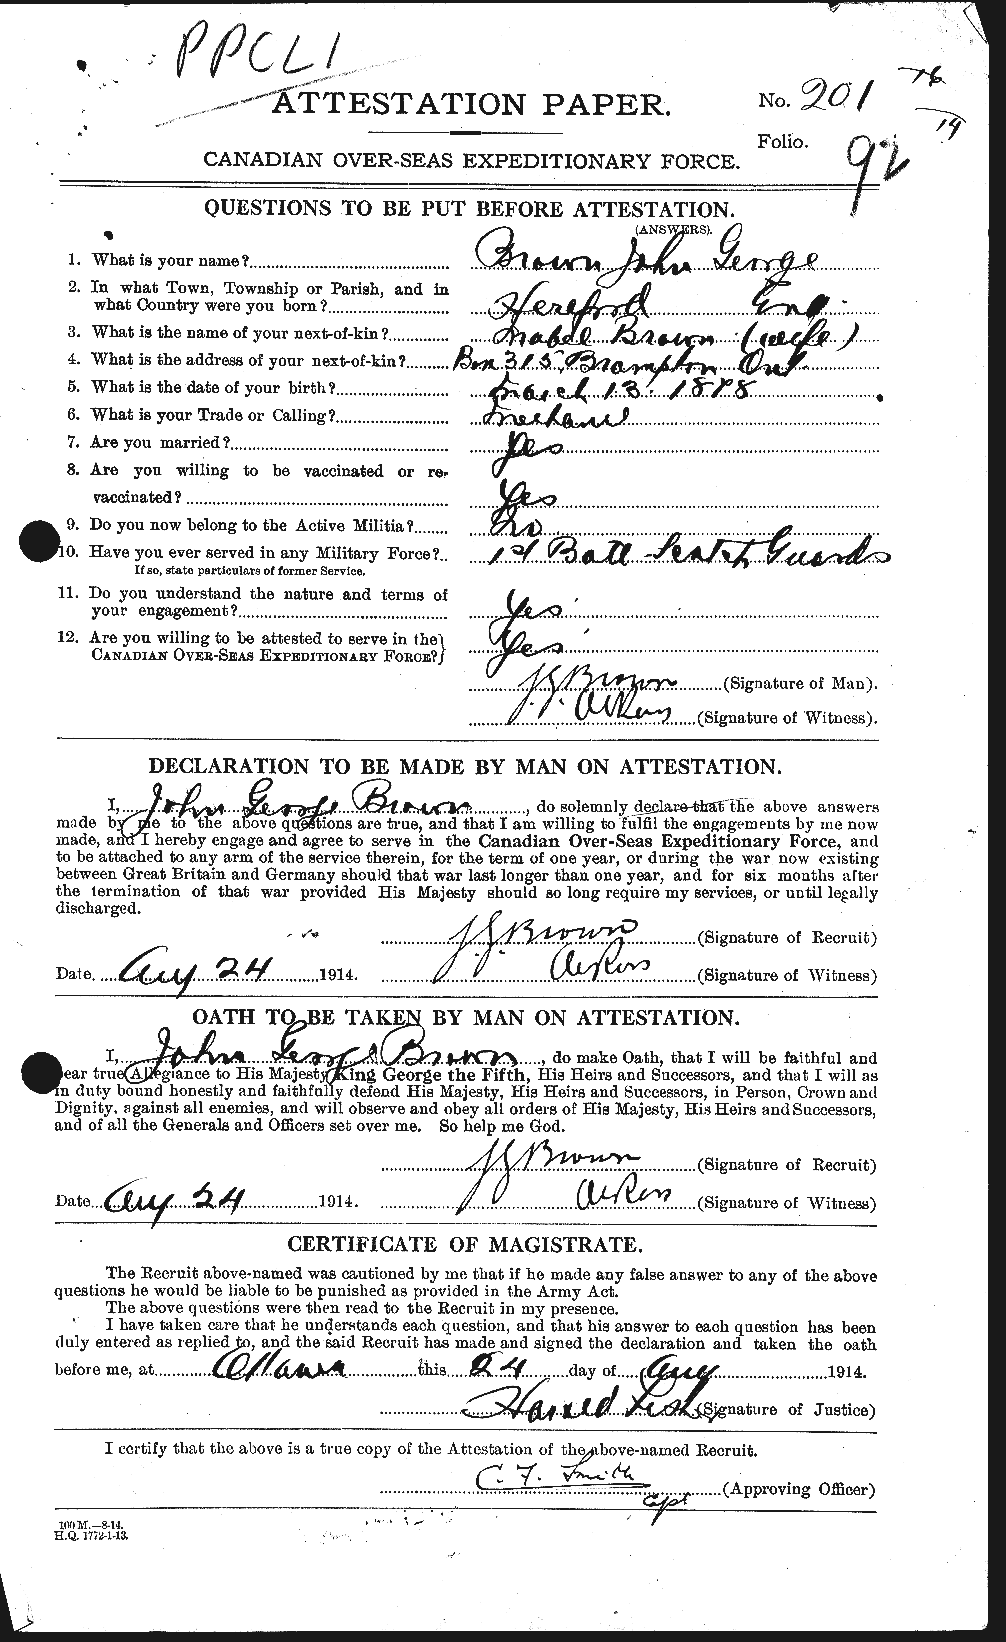 Personnel Records of the First World War - CEF 264601a